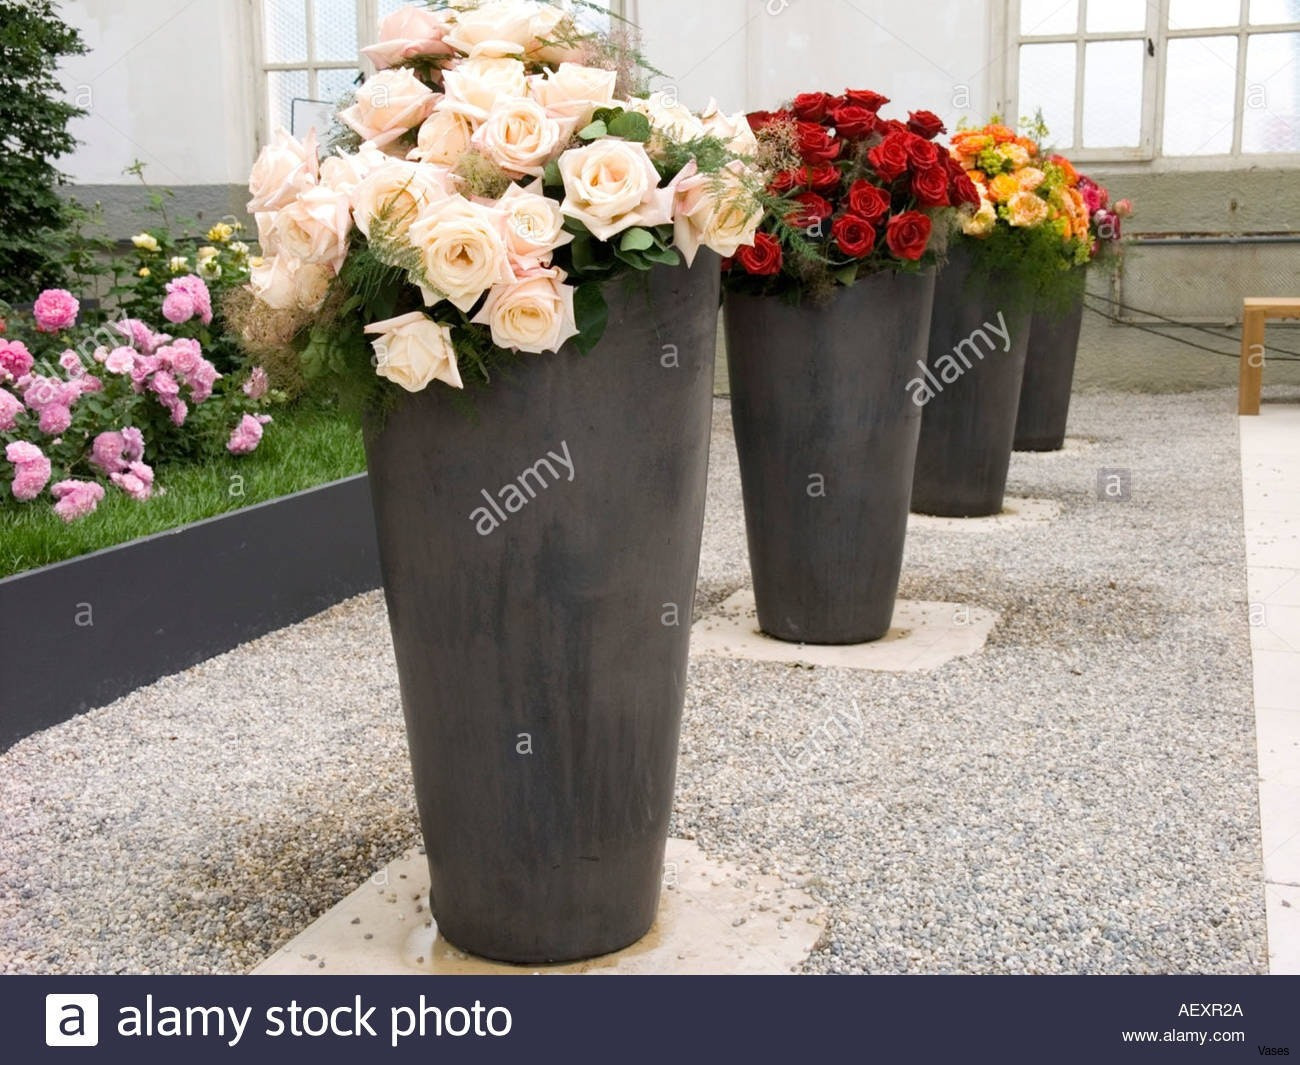 13 Stunning where Can I Buy Cheap Flower Vases 2024 free download where can i buy cheap flower vases of wedding photos uk lovely articles with flower vases for sale tag big with regard to articles with flower vases for sale tag big vase l vasei 0d uk